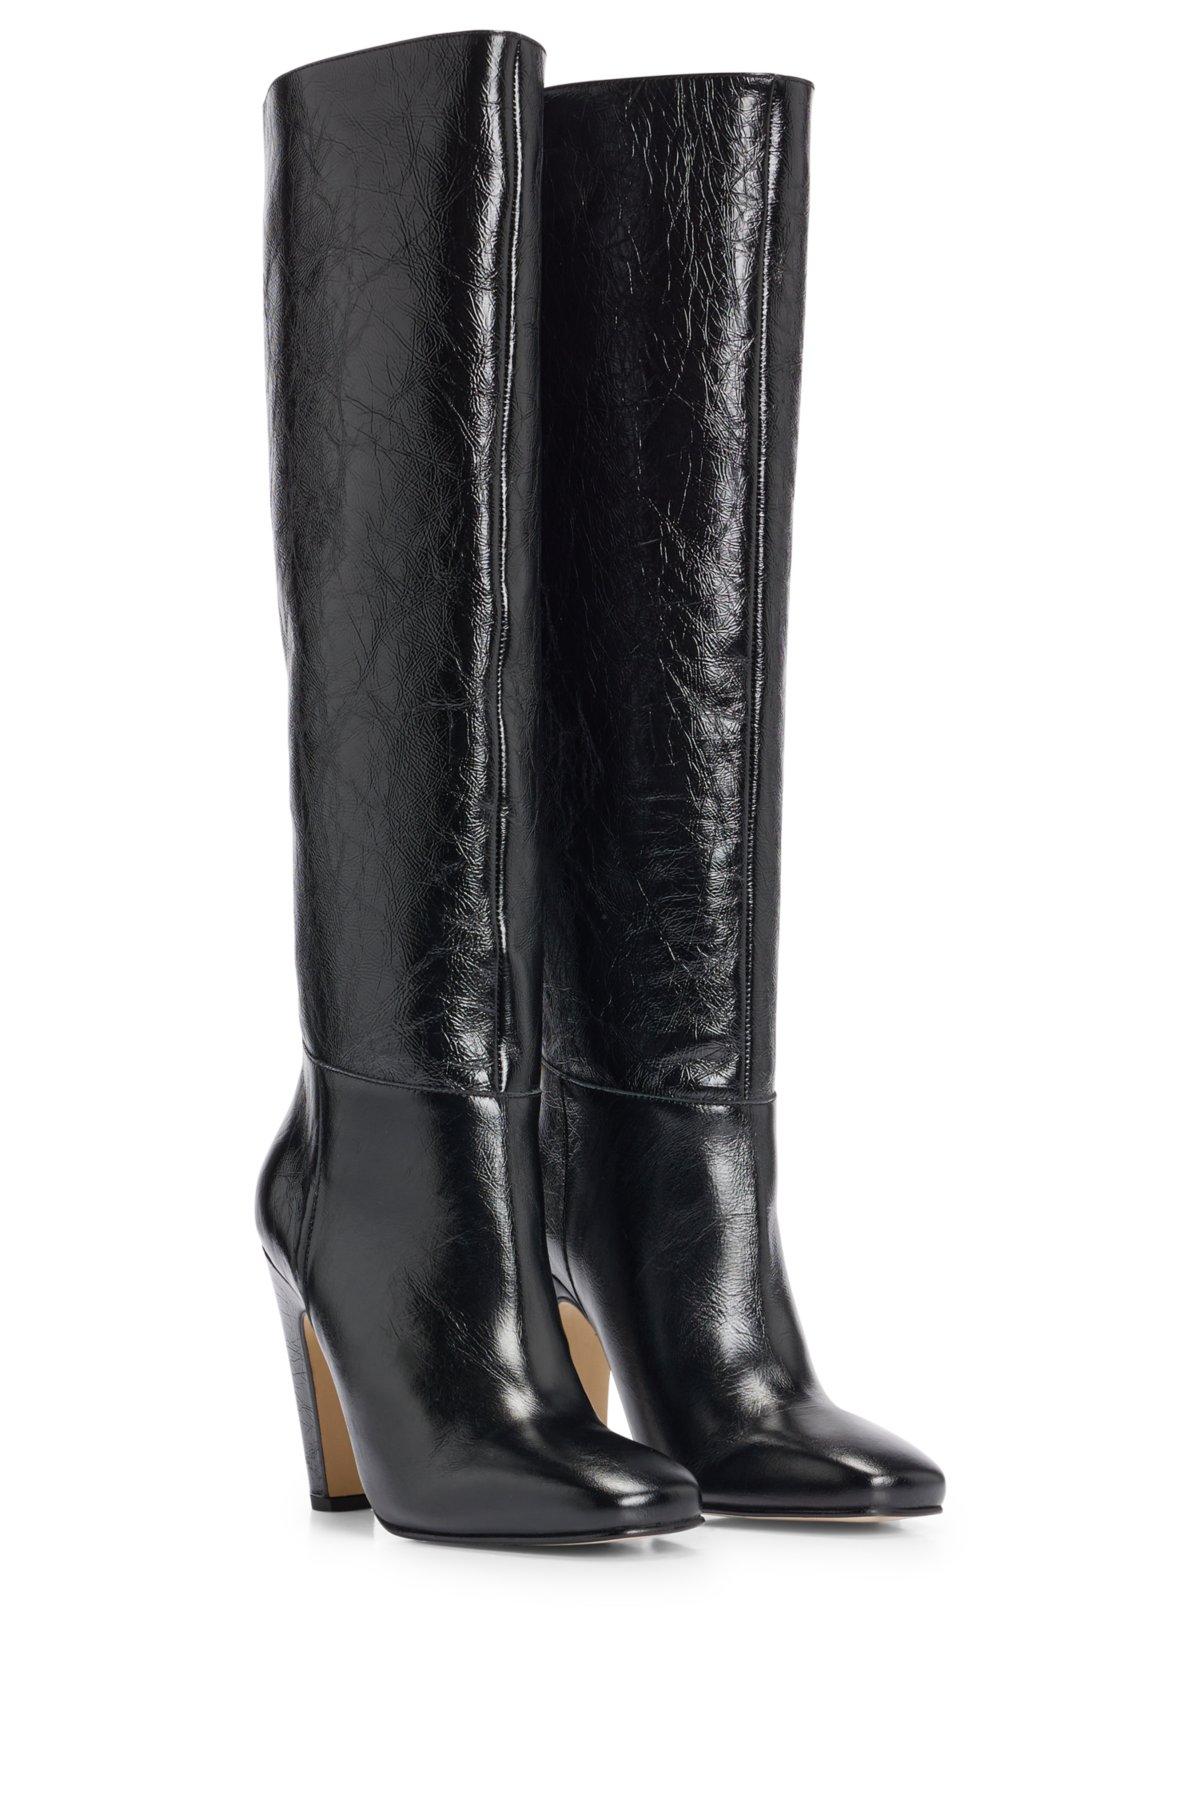 BOSS - High-heeled knee boots in crinkled leather